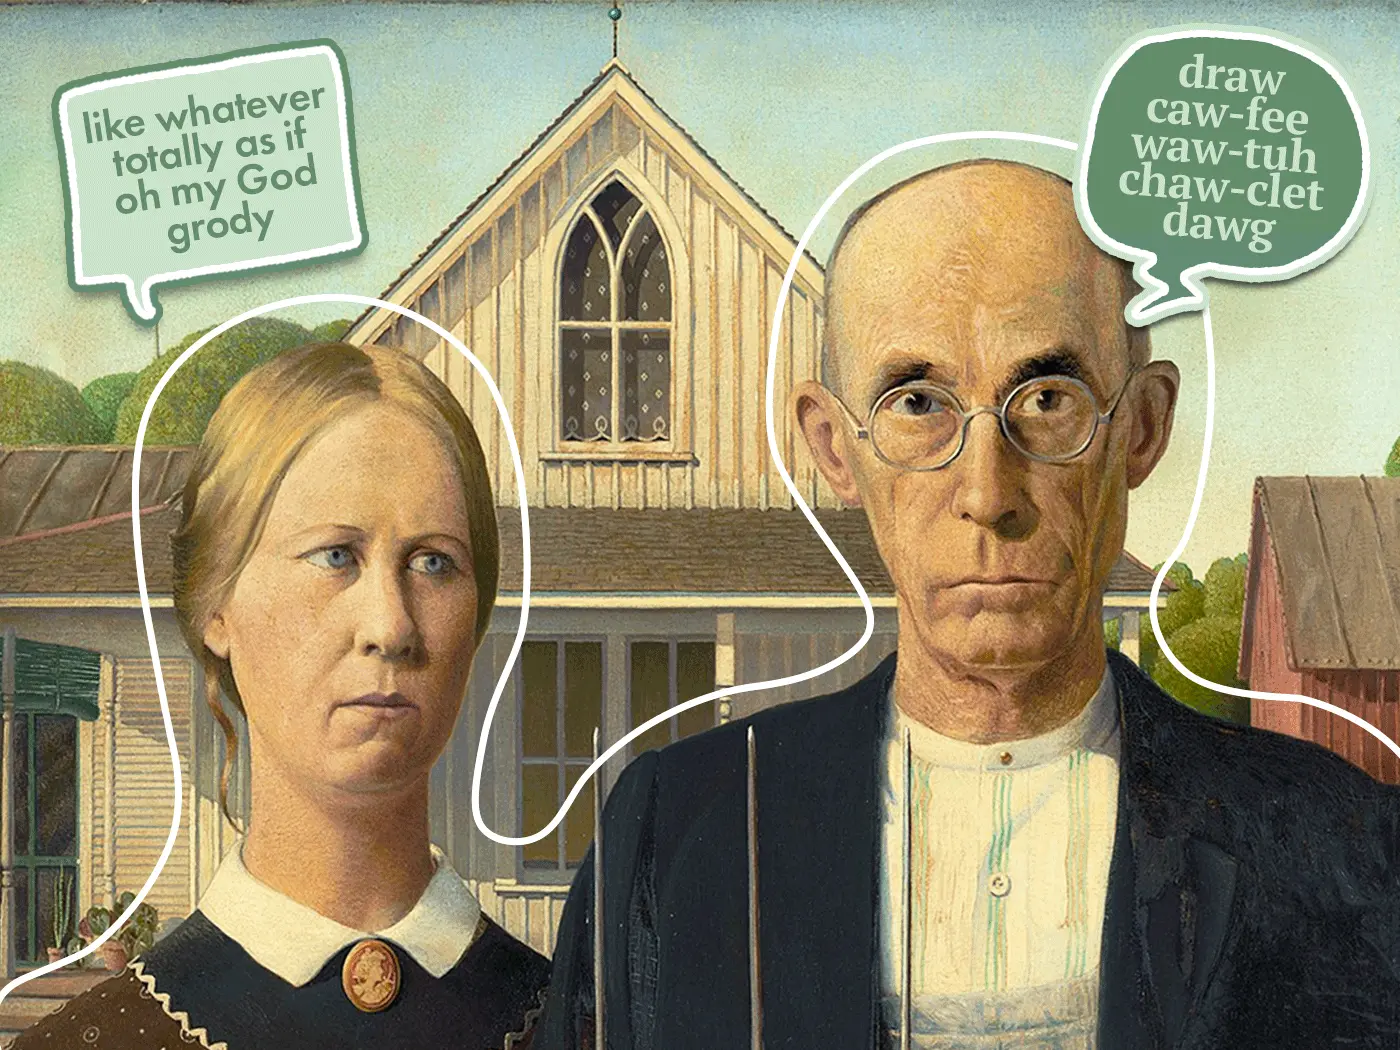 A GIF of Grant Wood's "American Gothic," with the subjects speaking in different dialects